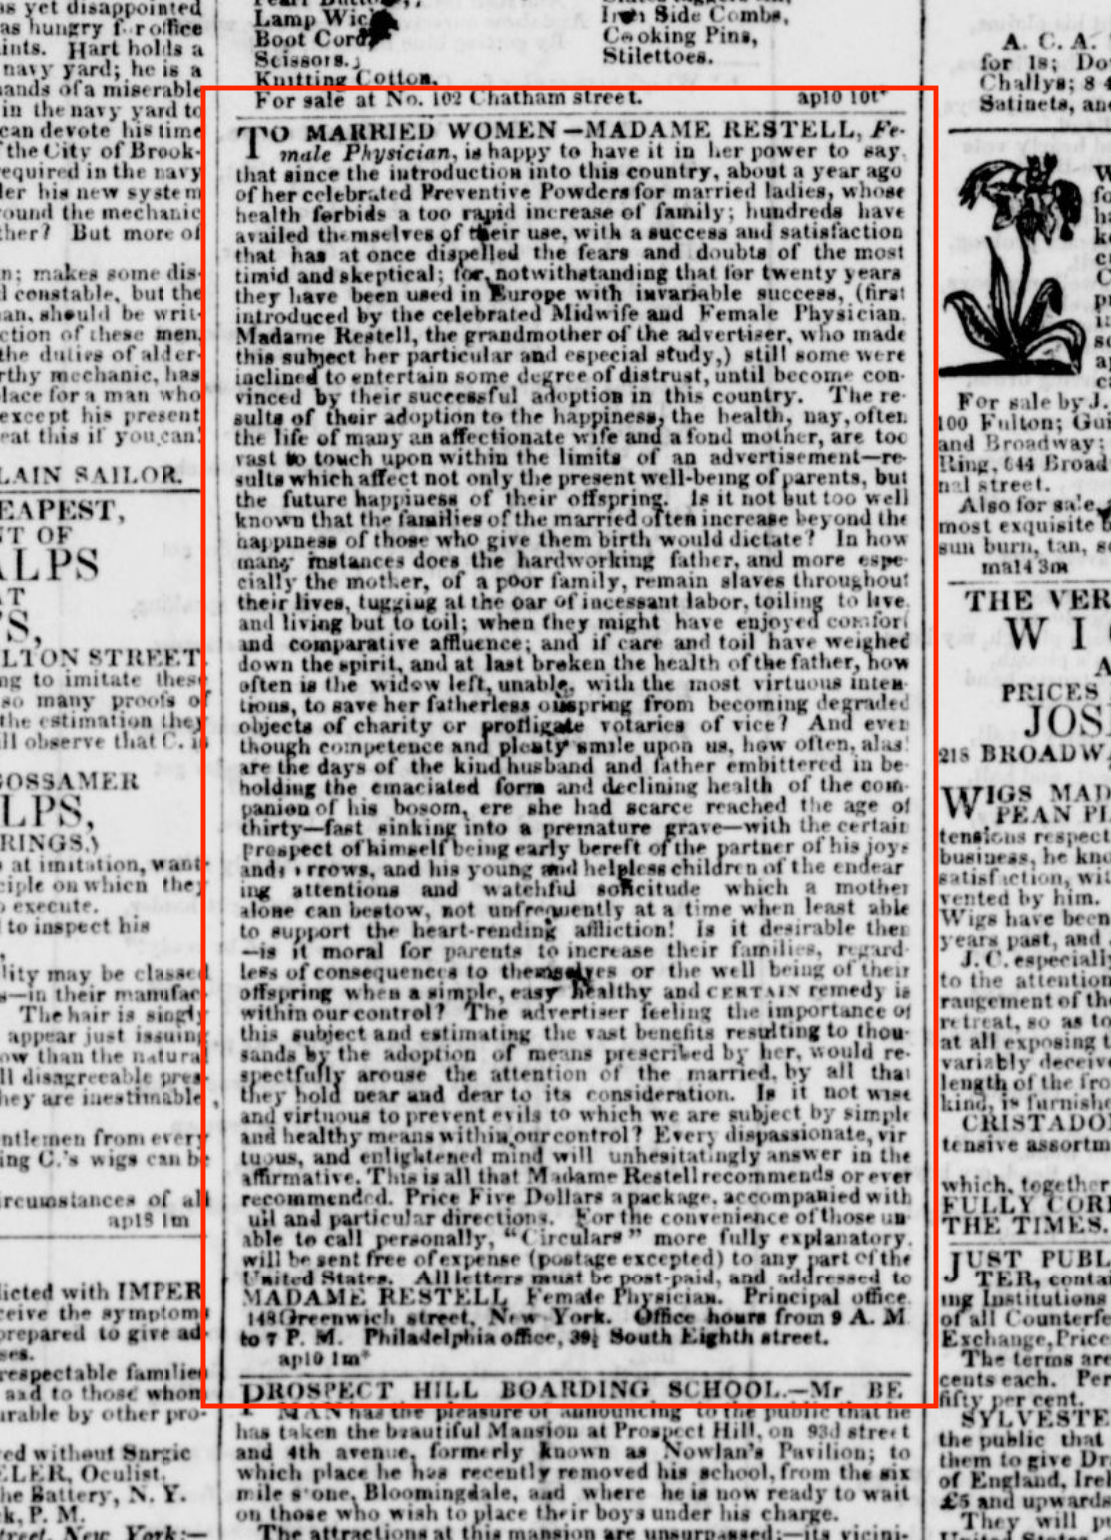 One of Restell’s most famous ads from New York’s Morning Herald, 13 April 1840